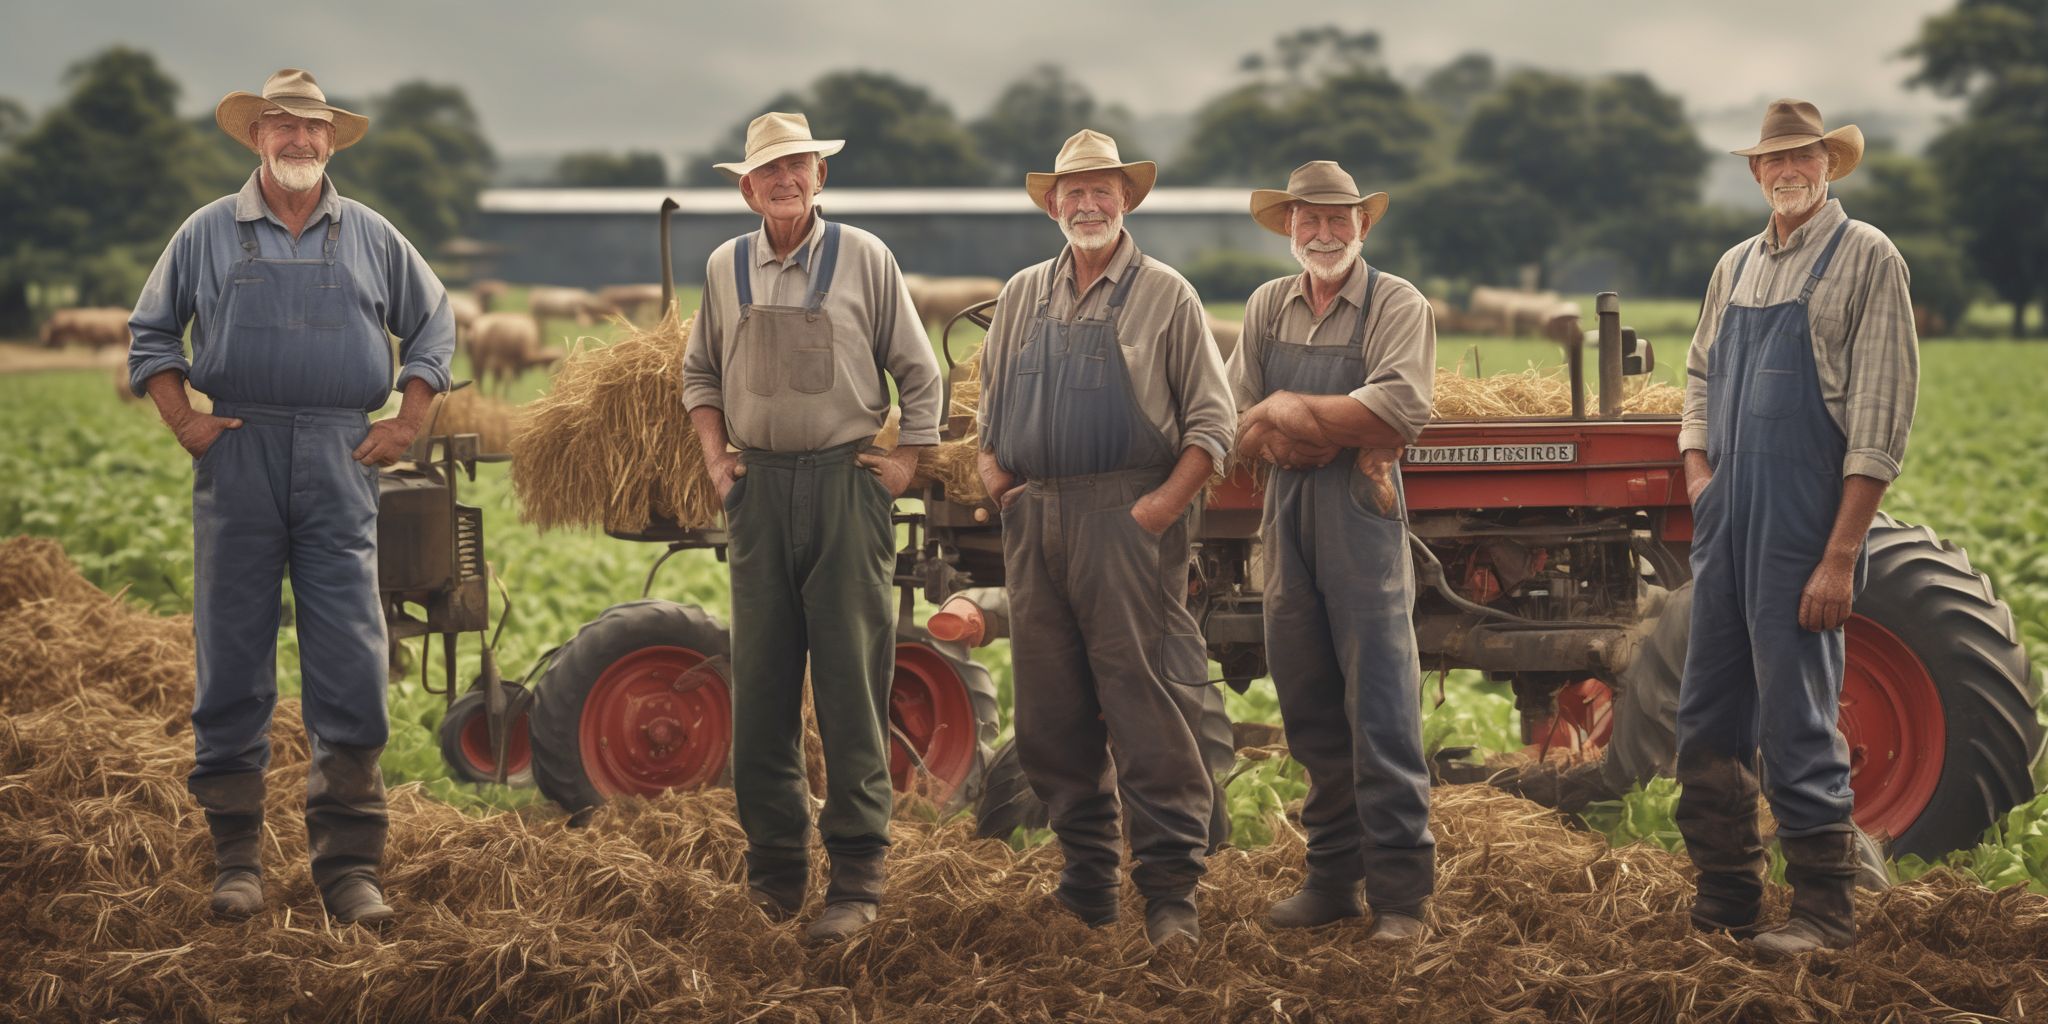 Farmers  in realistic, photographic style